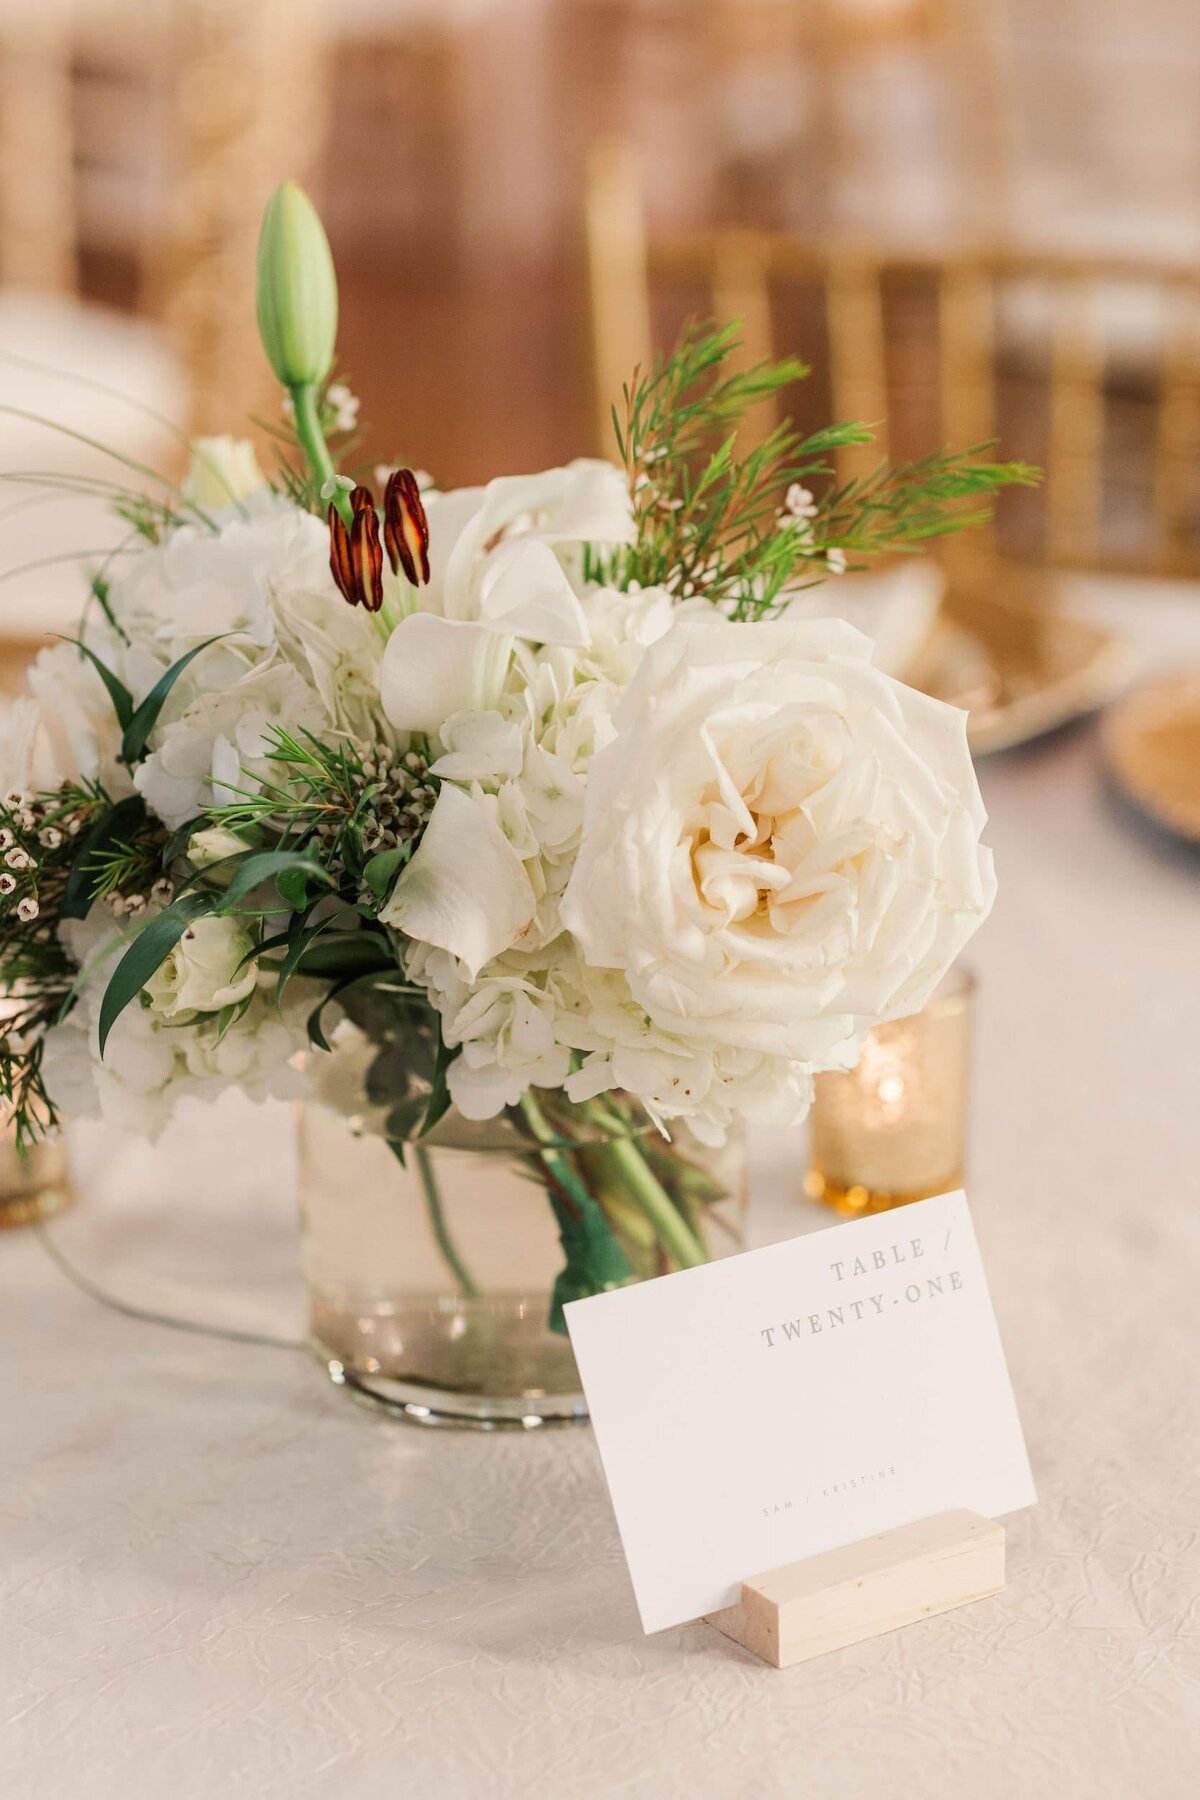 Centerpiece with placecard